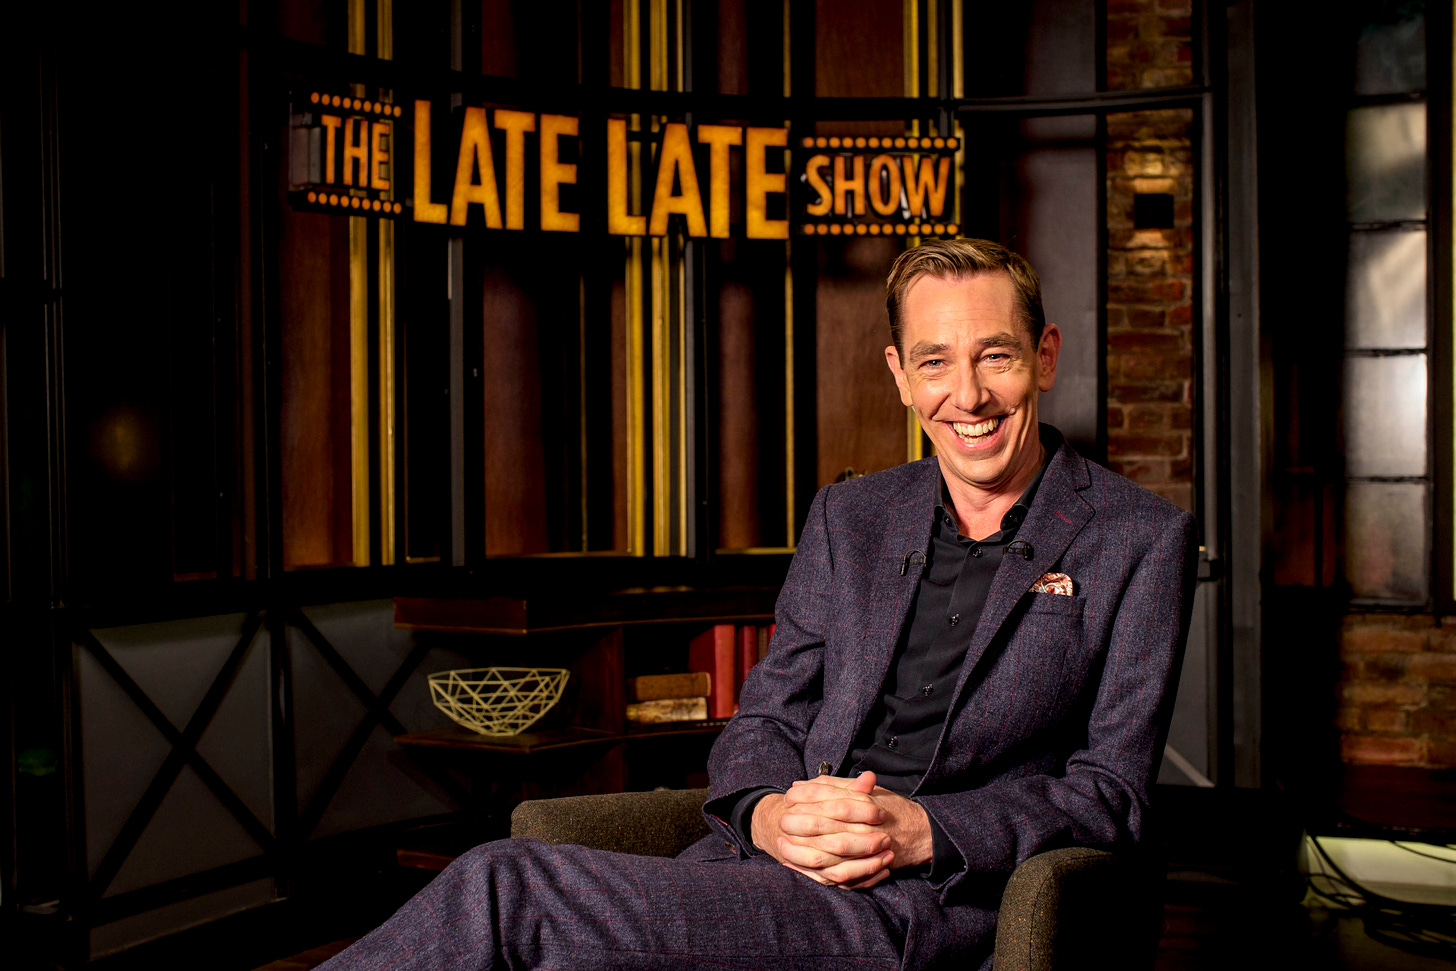 From shaved heads to tears shed, a look at top Late Late Show moments  through the years as it turns 60 | The Irish Sun